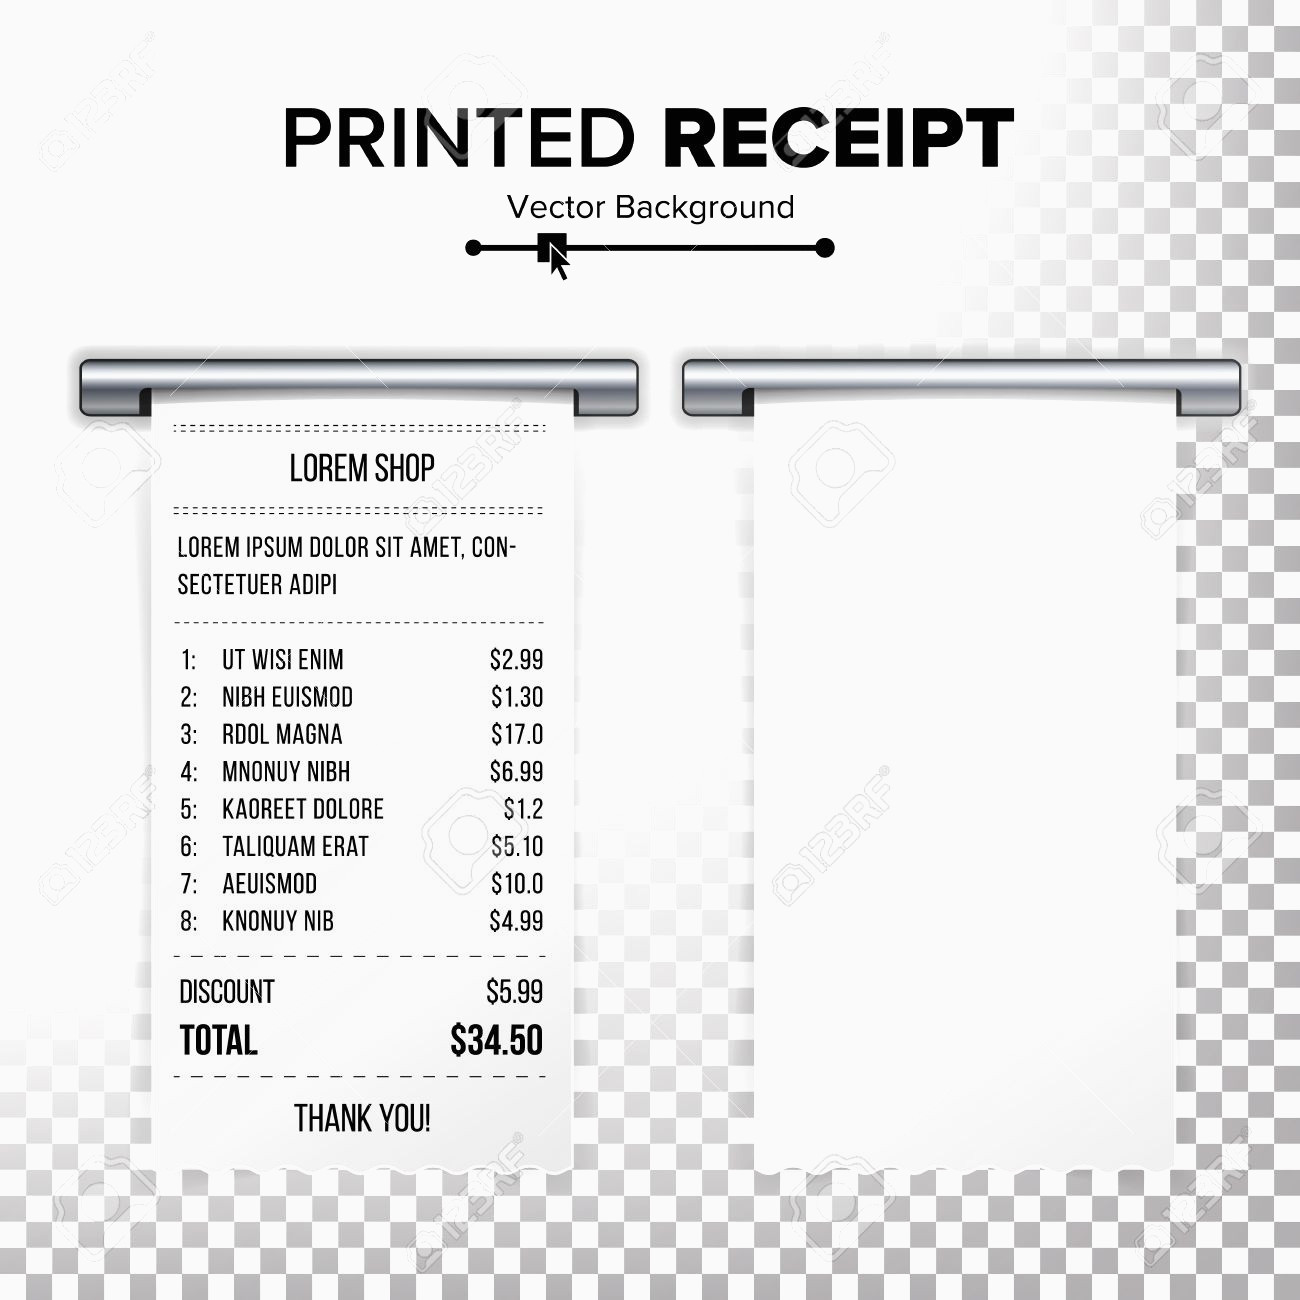 pawn-shop-receipt-template-tutore-org-master-of-documents